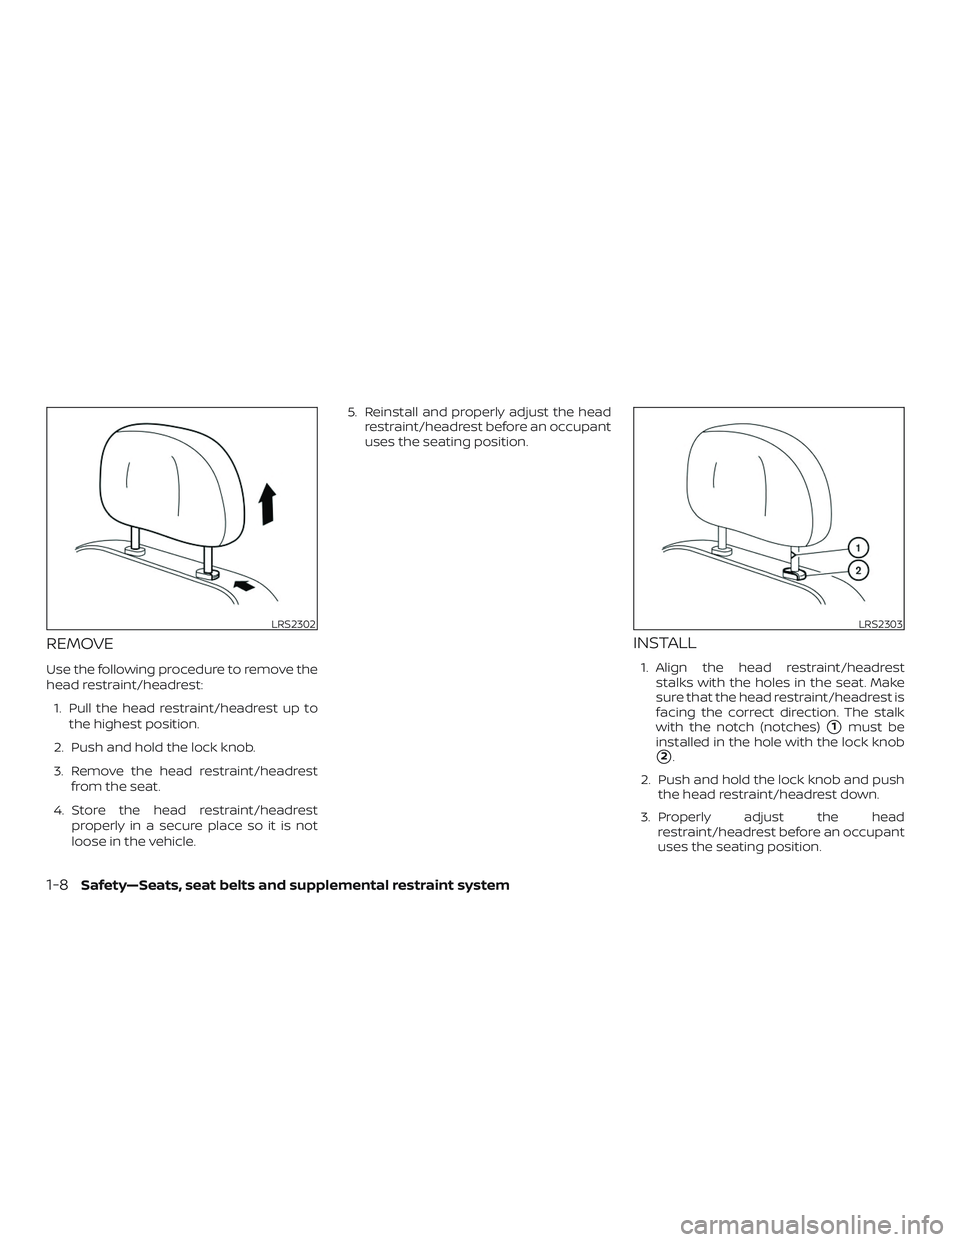 NISSAN VERSA NOTE 2019  Owner´s Manual REMOVE
Use the following procedure to remove the
head restraint/headrest:1. Pull the head restraint/headrest up to the highest position.
2. Push and hold the lock knob.
3. Remove the head restraint/he